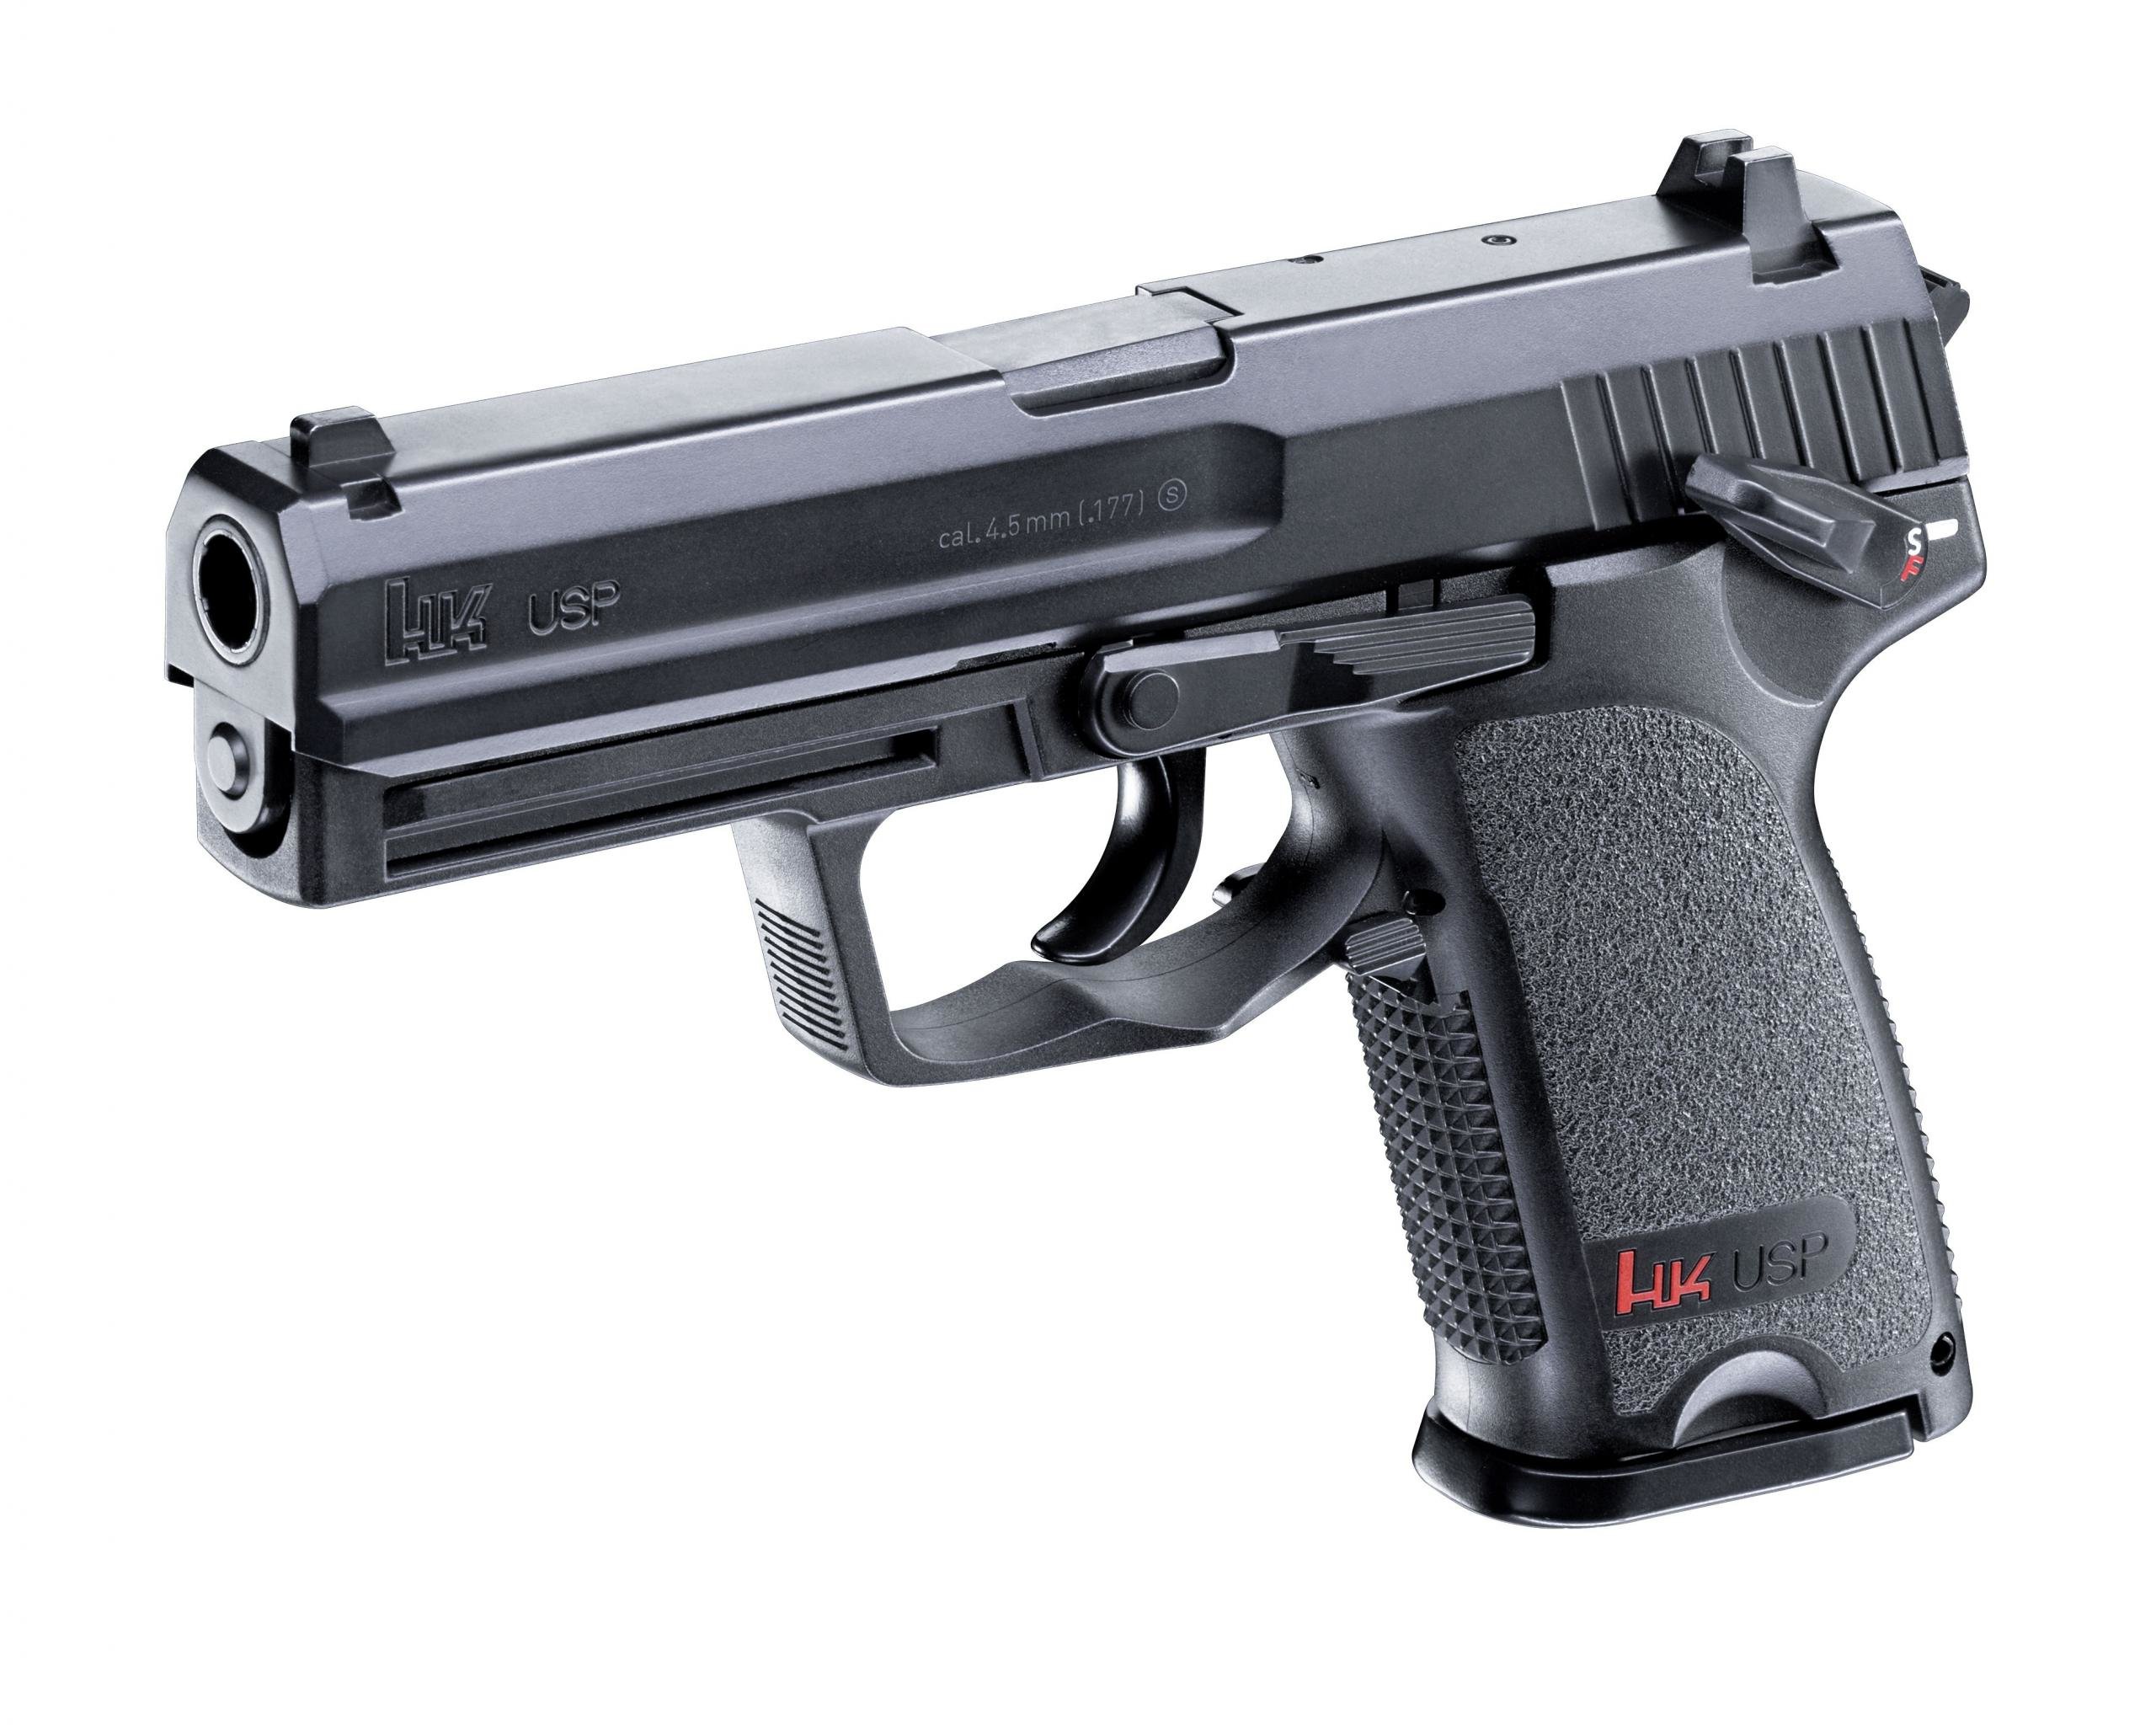 Awesome Heckler Koch Pistol Free Wallpaper Id 409536 For Hd Images, Photos, Reviews